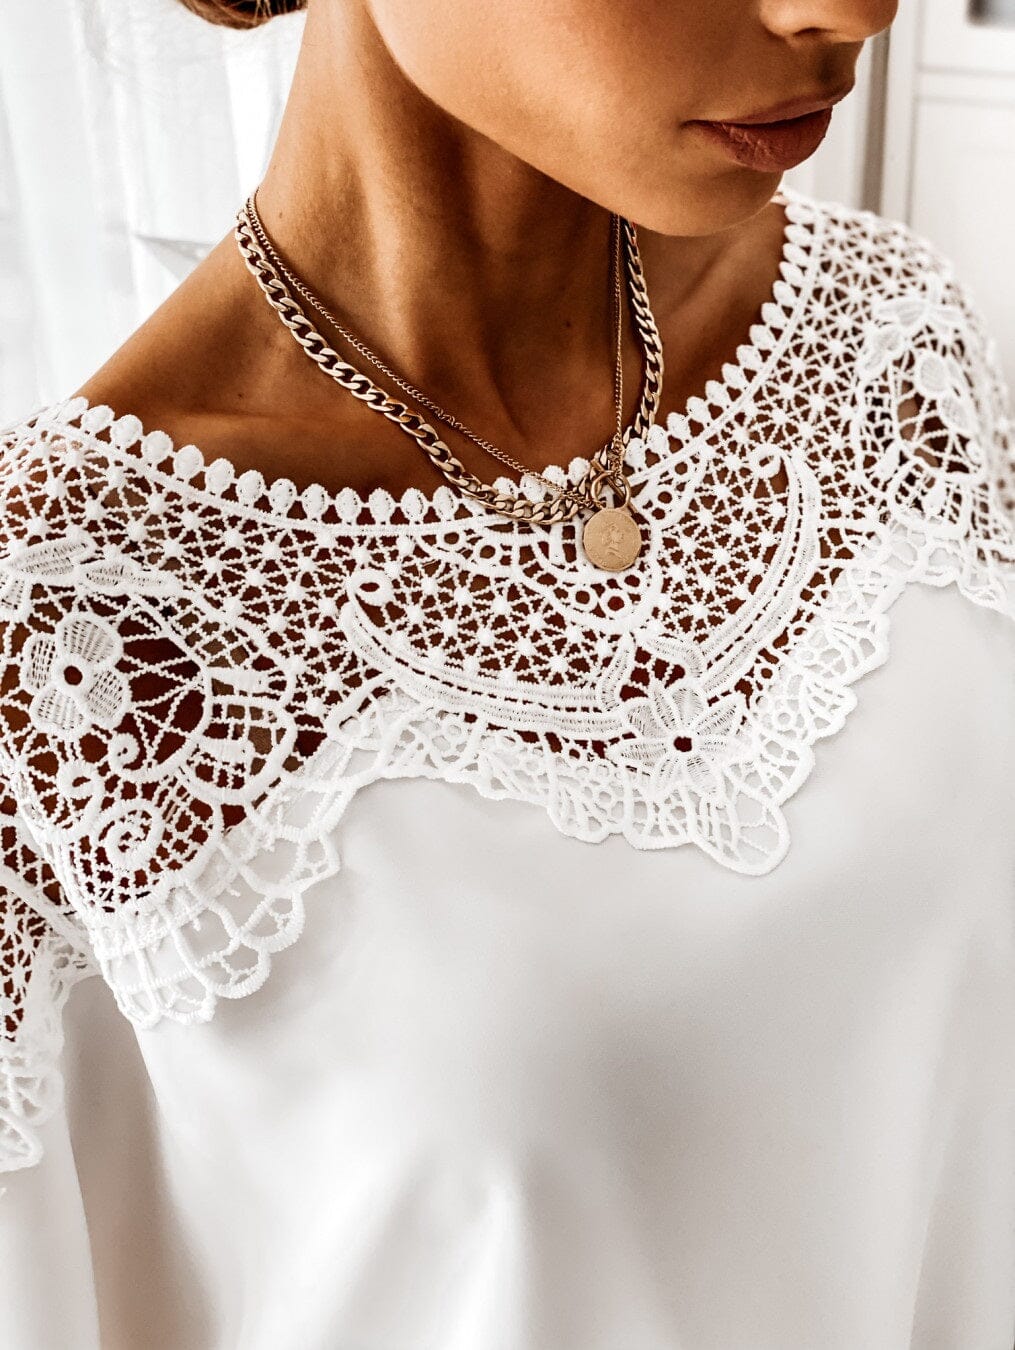 Women Summer 3/4 sleeves Crop Top Tie Front Crochet Embroidery Sexy Lace Stitching Vintage Elegant Blouse_ jehouze 